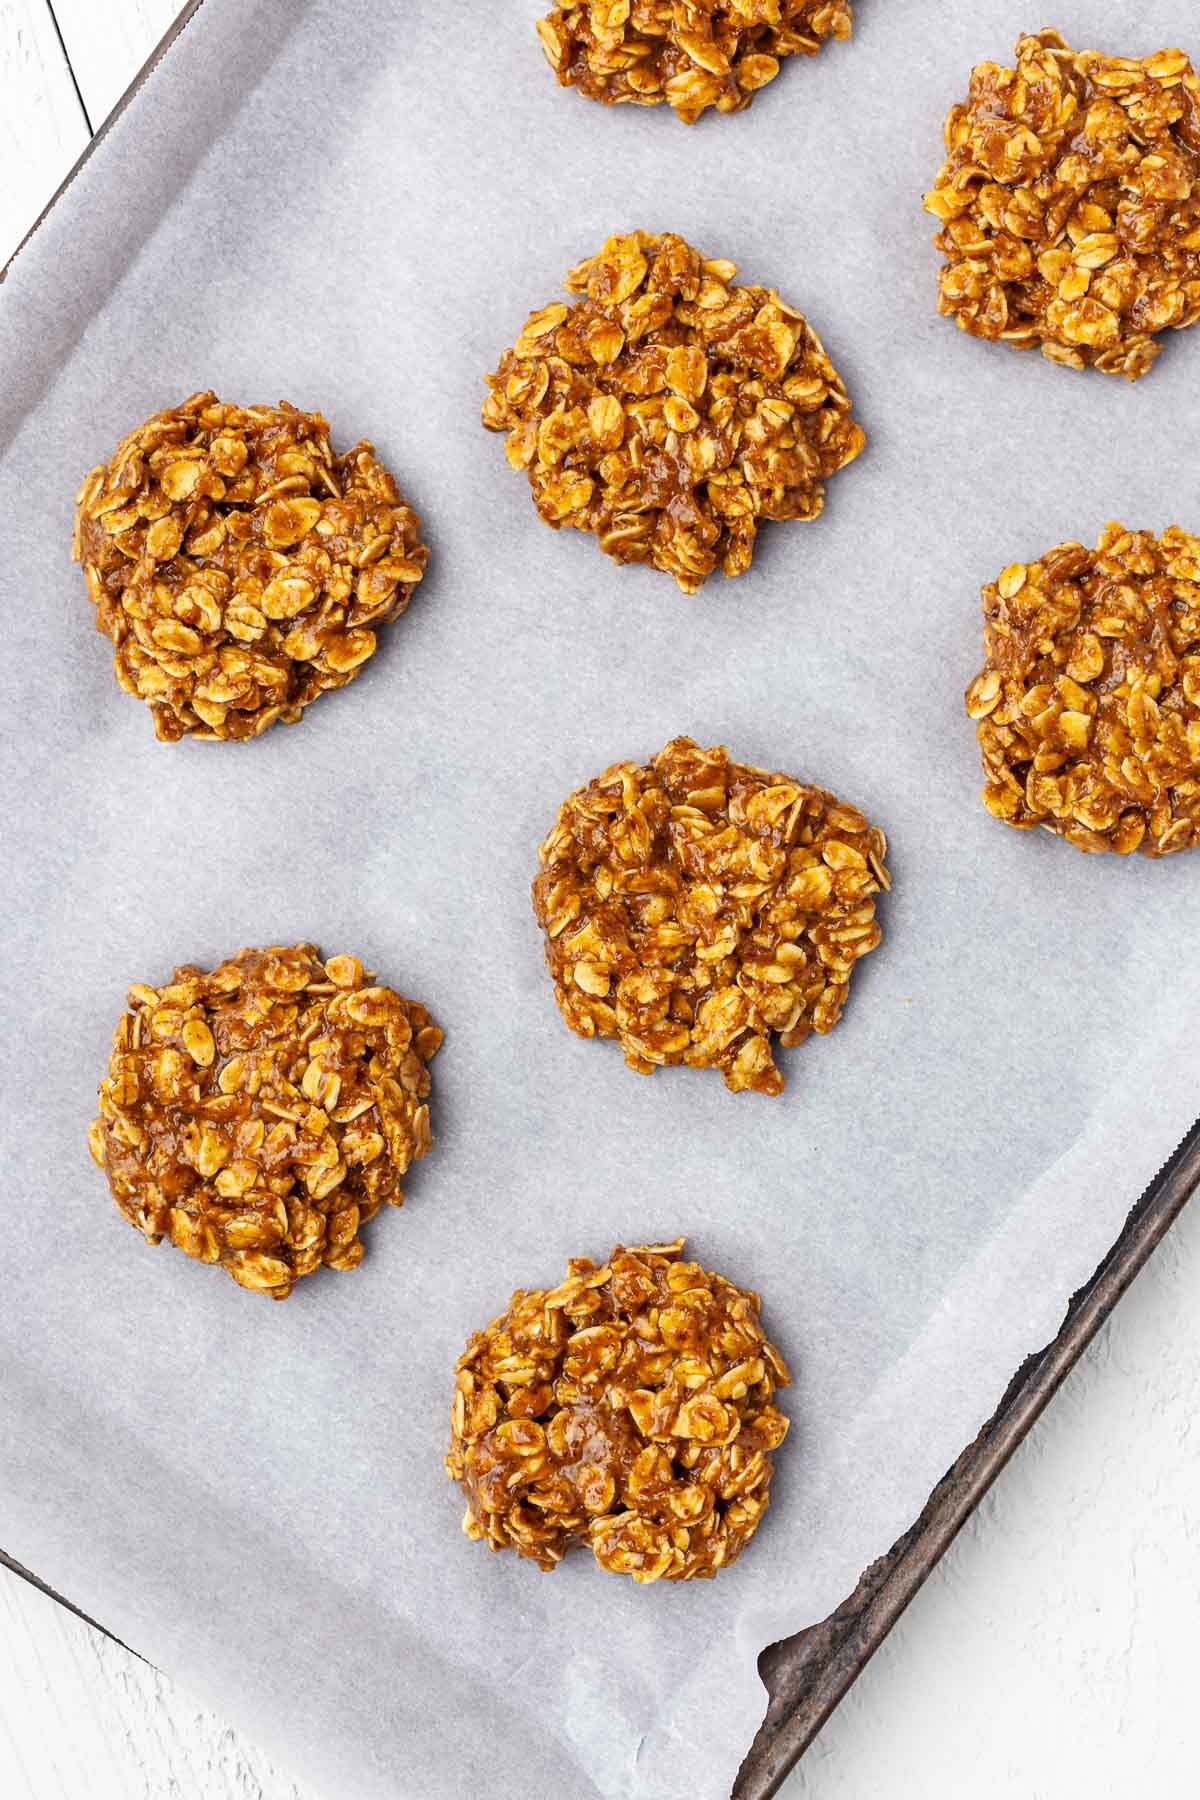 Overhead view of unbaked vegan peanut butter oatmeal cookies on a baking sheet.